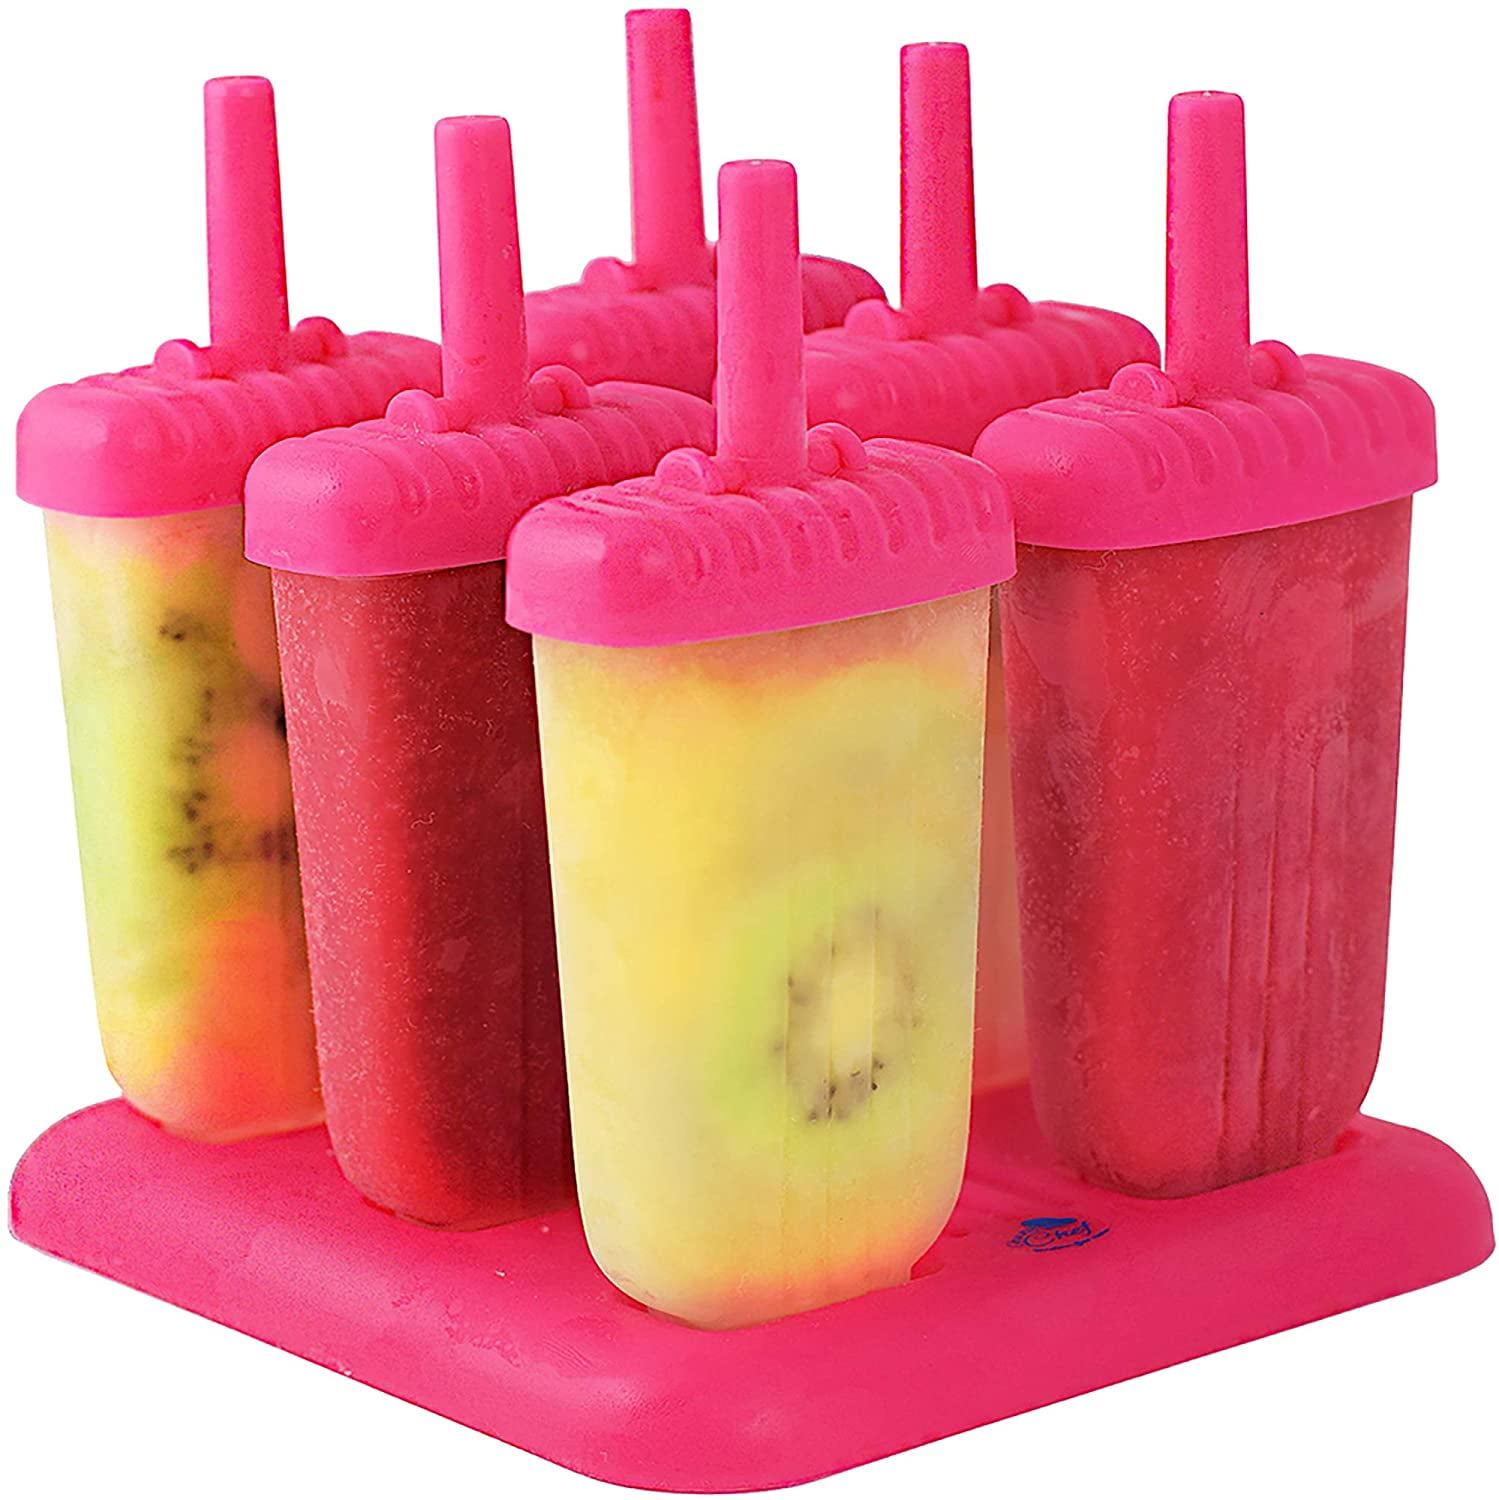 Josliki Popsicle Ice Mold Maker Set - 6 Pack BPA Free Reusable Ice Cream DIY Pop Molds Holders with Tray & Sticks Popsicles Maker Fun for Kids and Adults